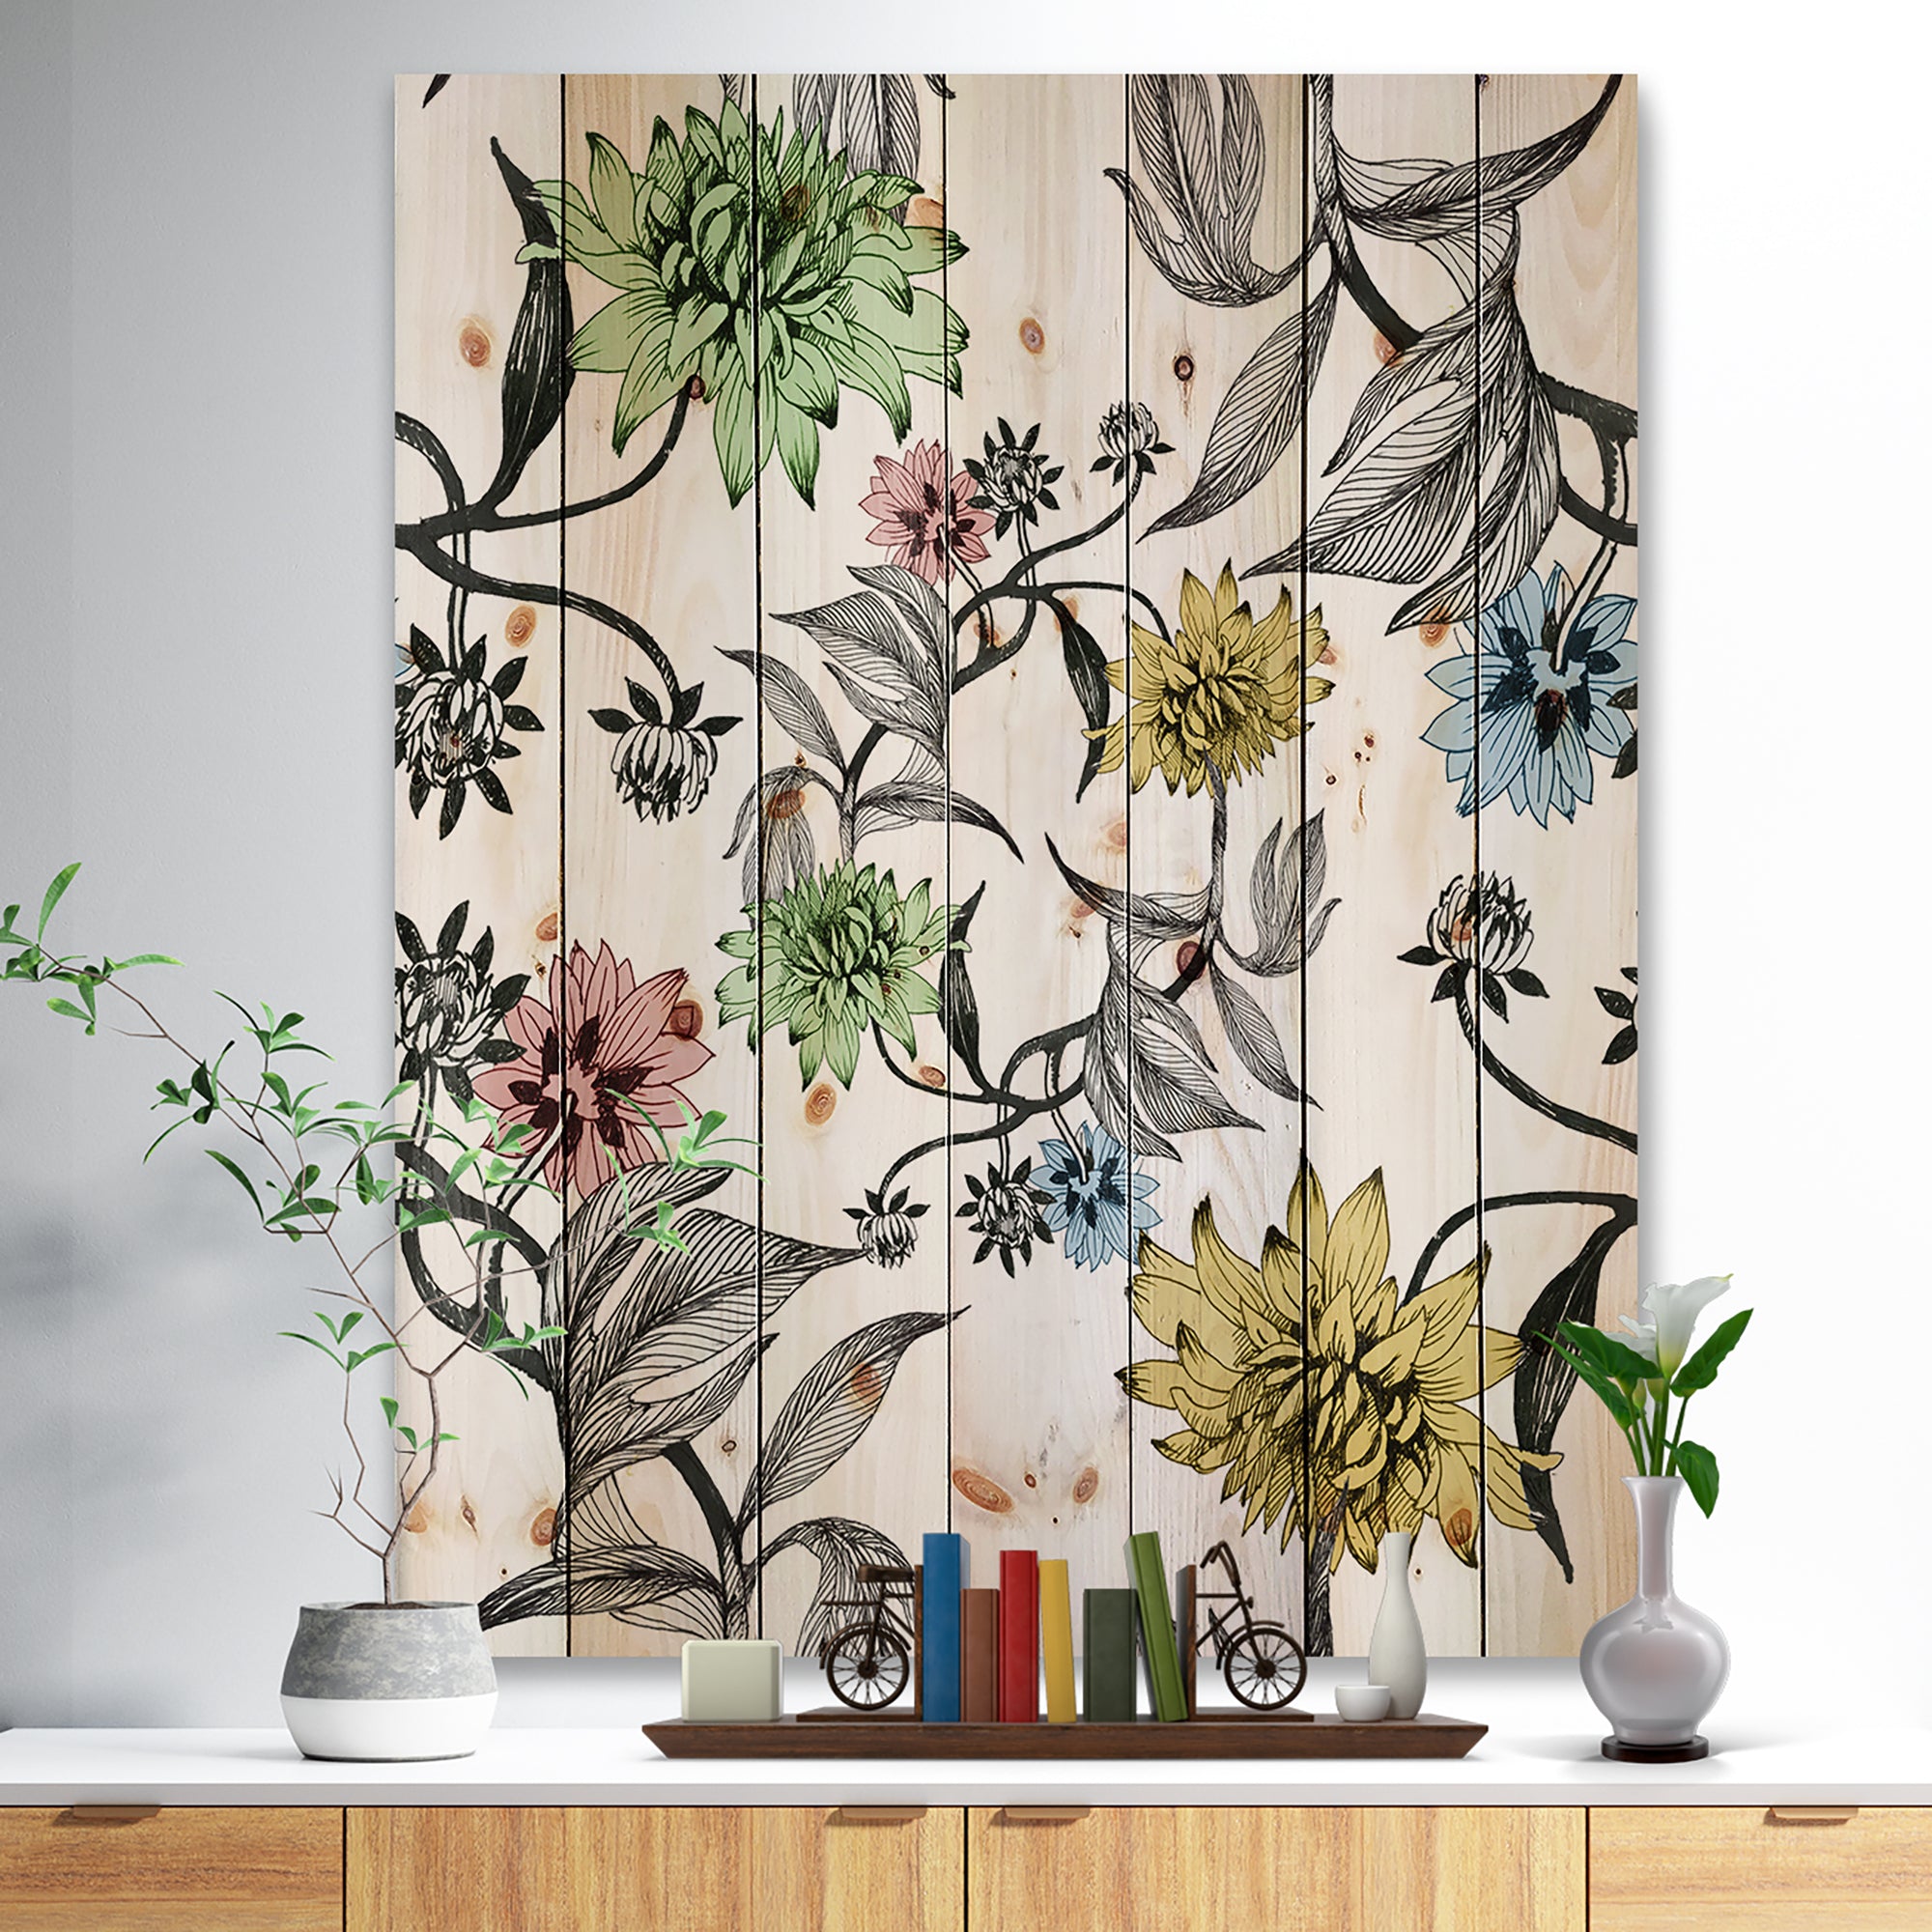 Hand drawn summer flowers - Floral Painting Print on Natural Pine Wood - 15x20